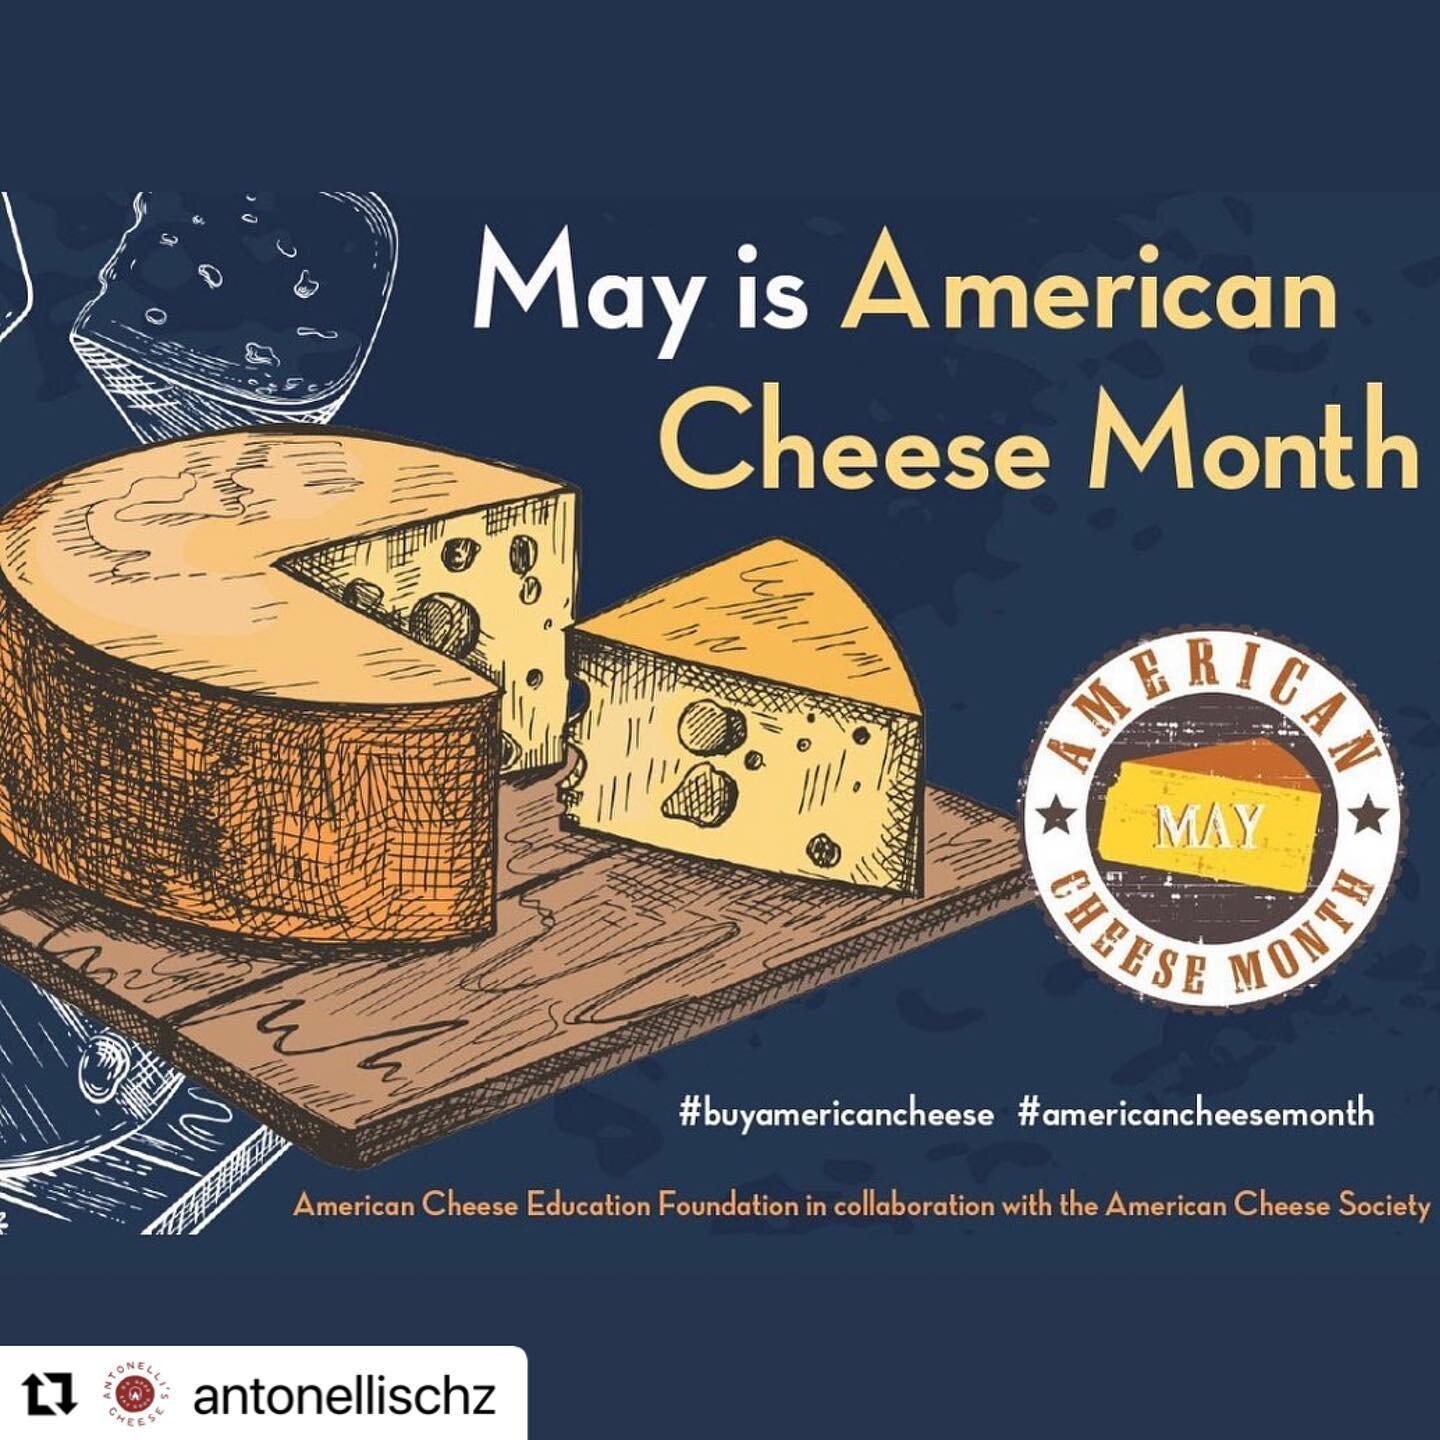 It's the final stretch! 
Have you visited your local cheese shop yet?!?

#Repost @antonellischz with @make_repost
・・・
May is American Cheese Month!!! 

This nationwide initiative of the American Cheese Education Foundation seeks to:
(1) create excite